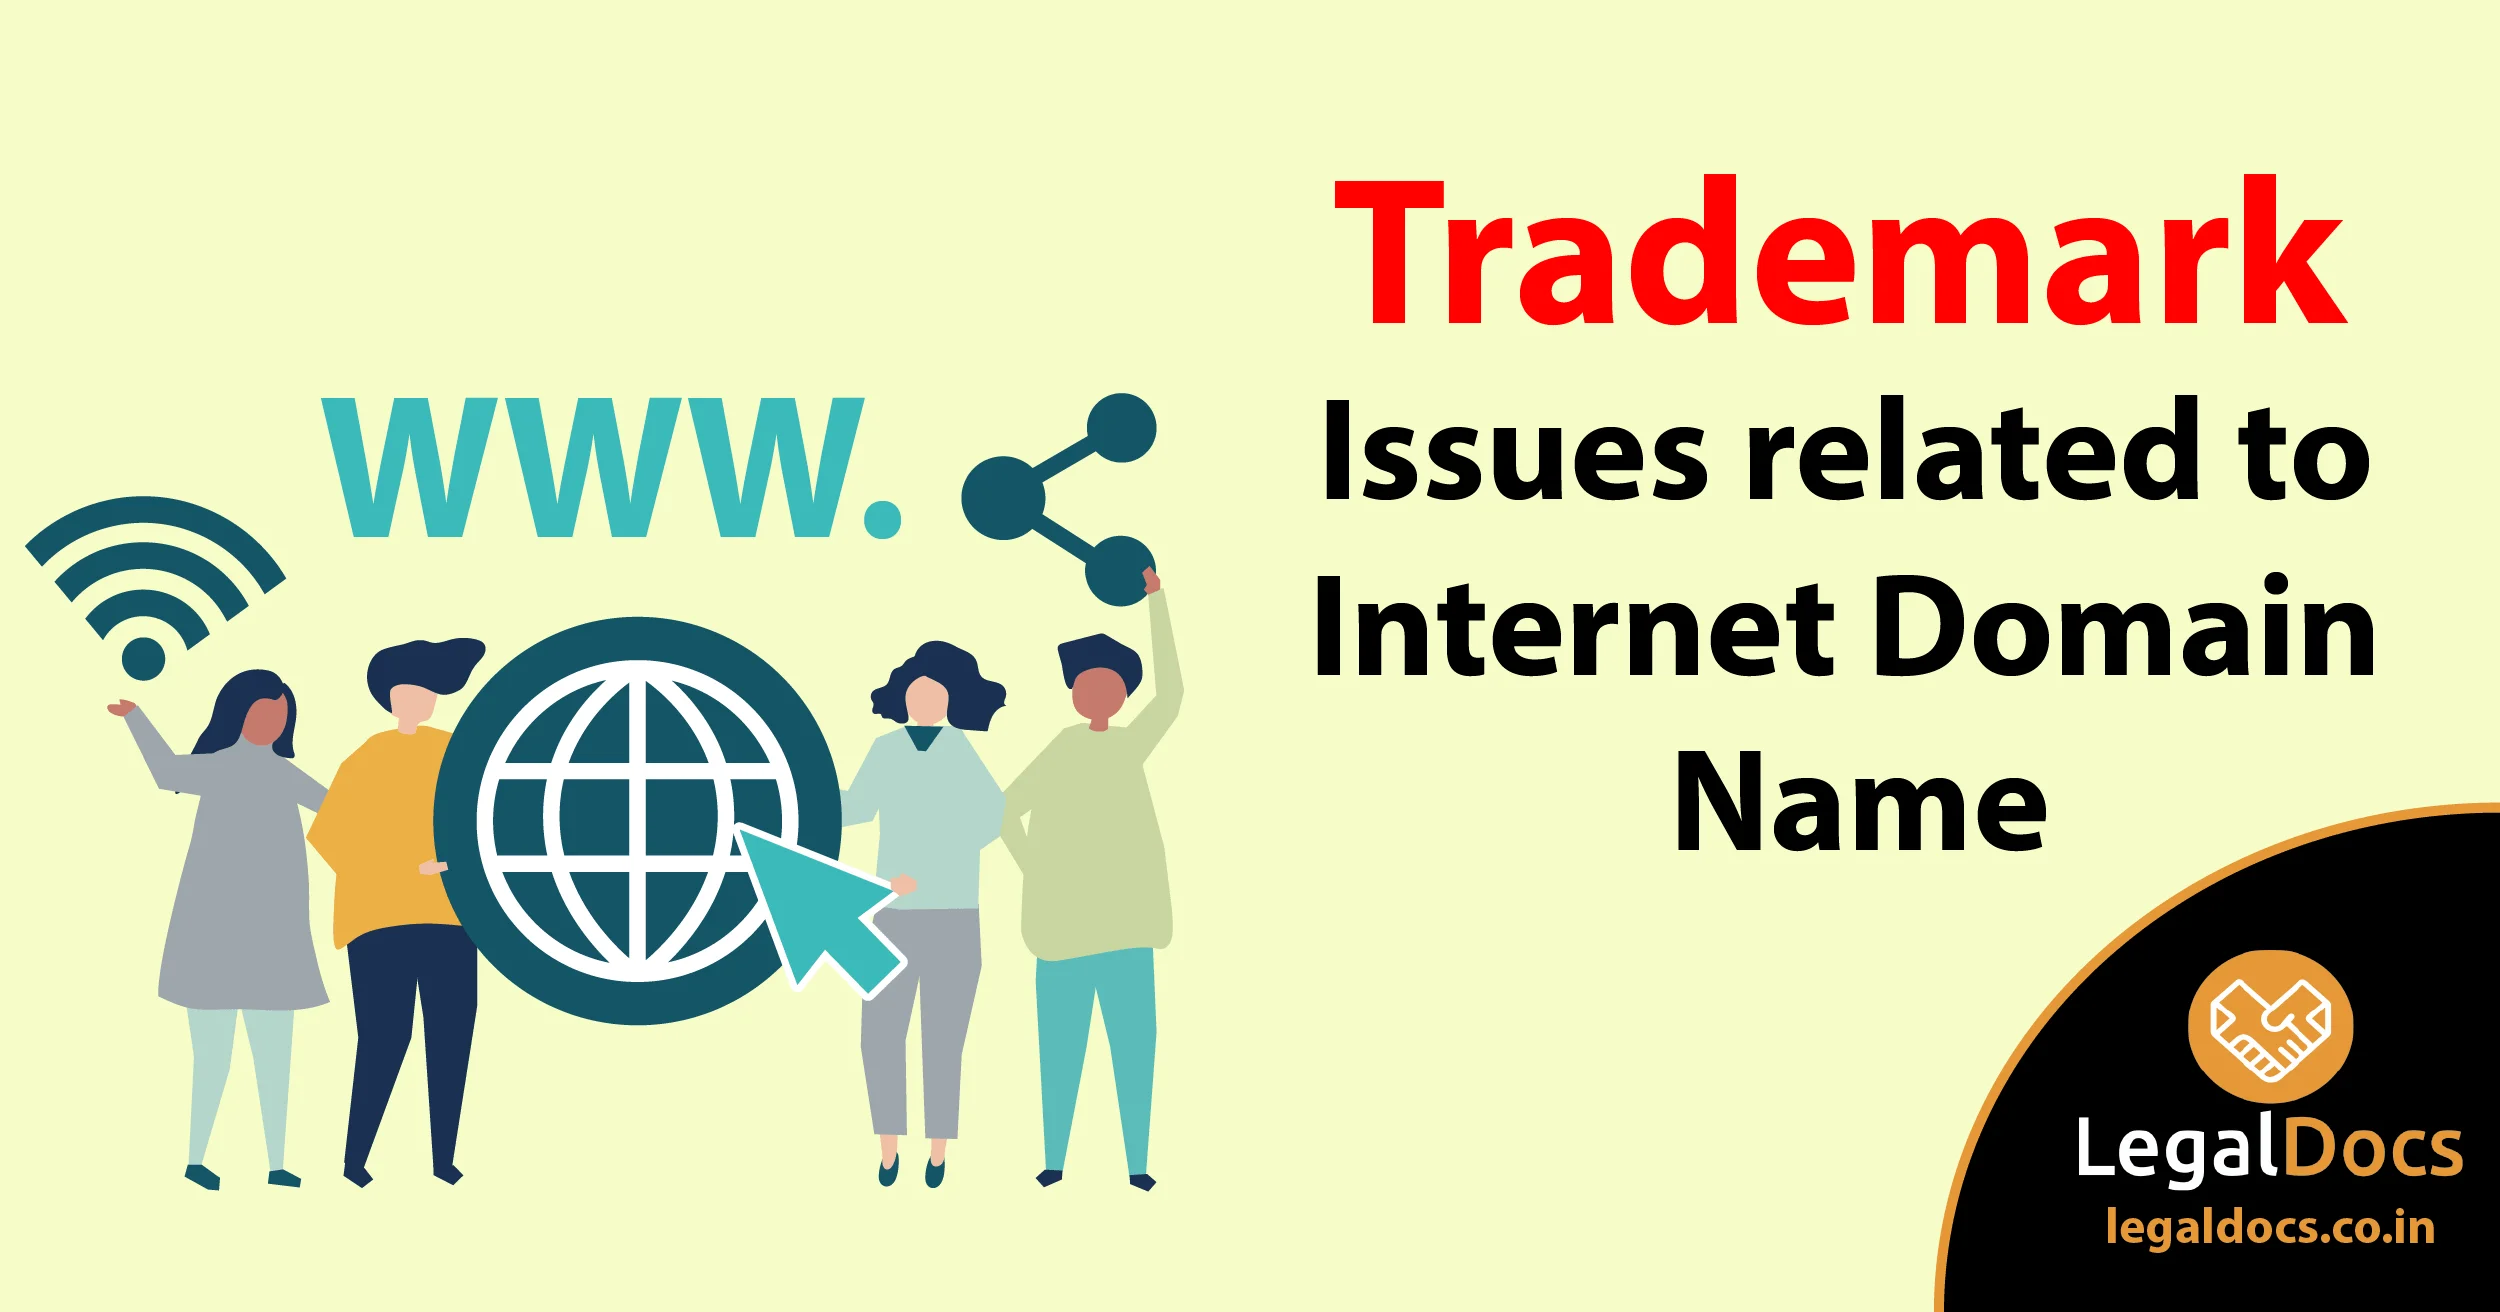 Trademark Issues related to Internet Domain Name